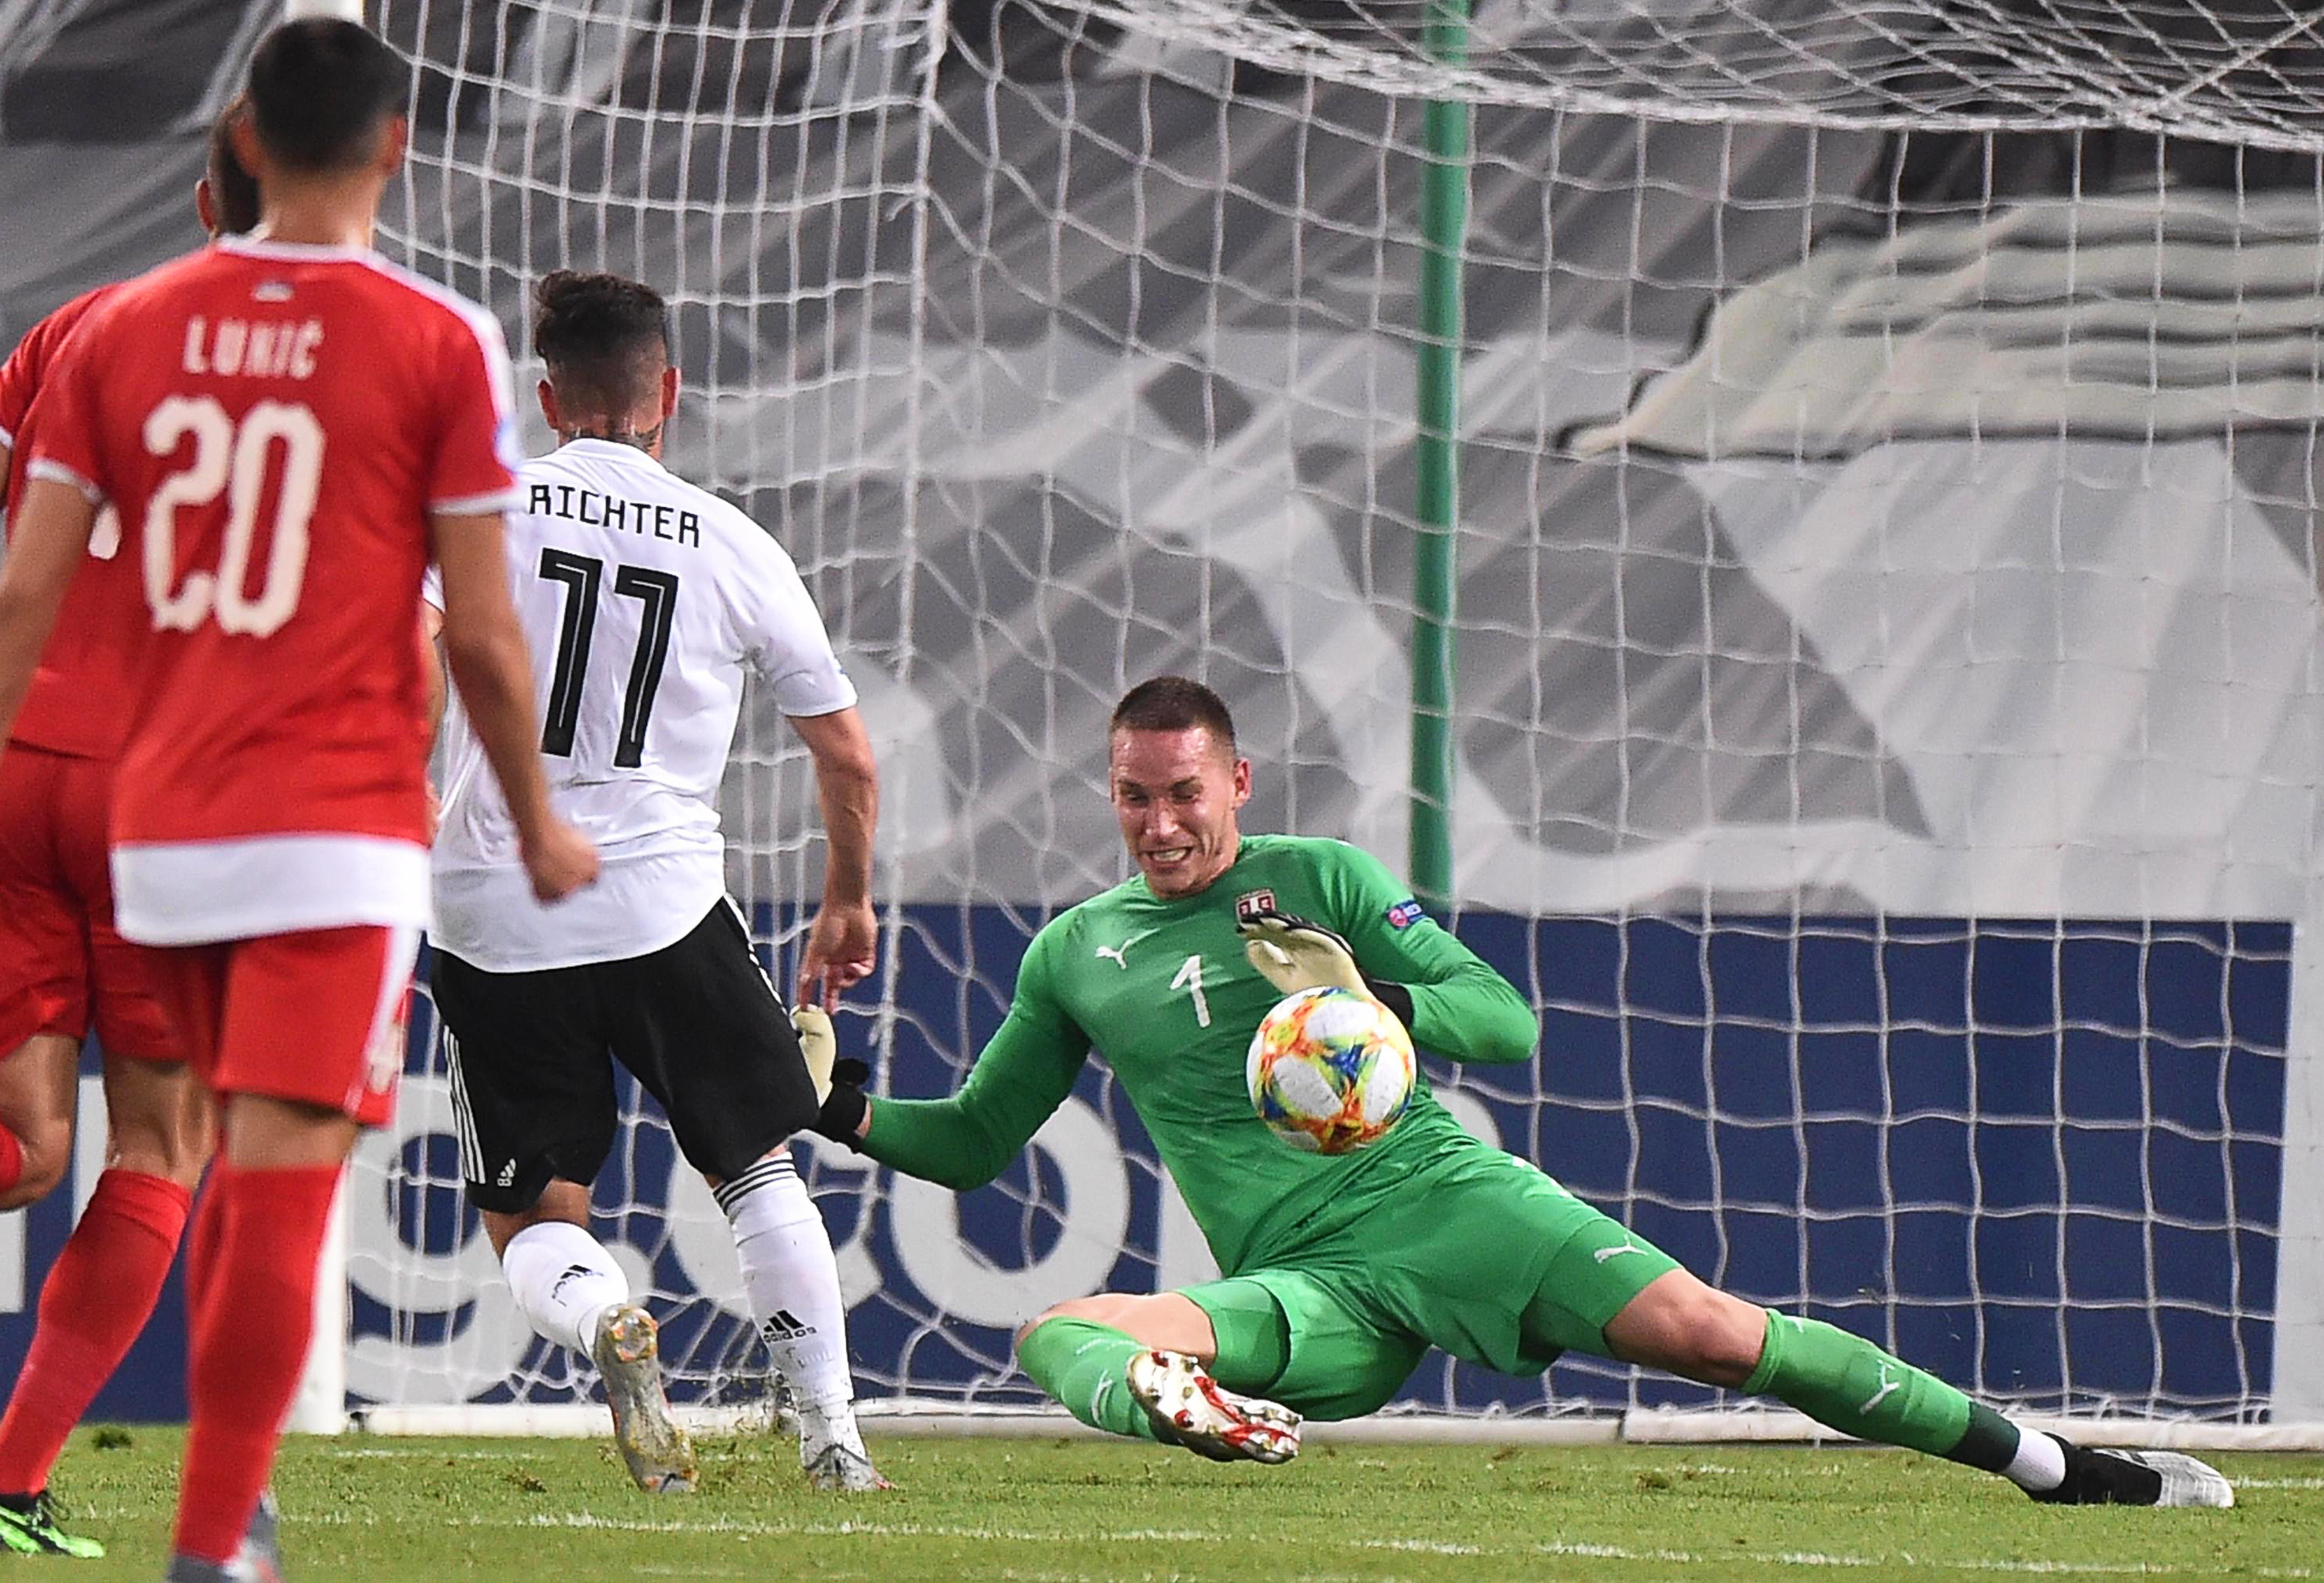 epa07661629 Germany's Marco Richter (2-L) scores the opening goal against Serbia's goalkeeper Boris Radunovic (R) during the UEFA European Under-21 Championship 2019 group B soccer match between Germany and Serbia in Trieste, Italy, 20 June 2019.  EPA/FRANCO DEBERNARDI